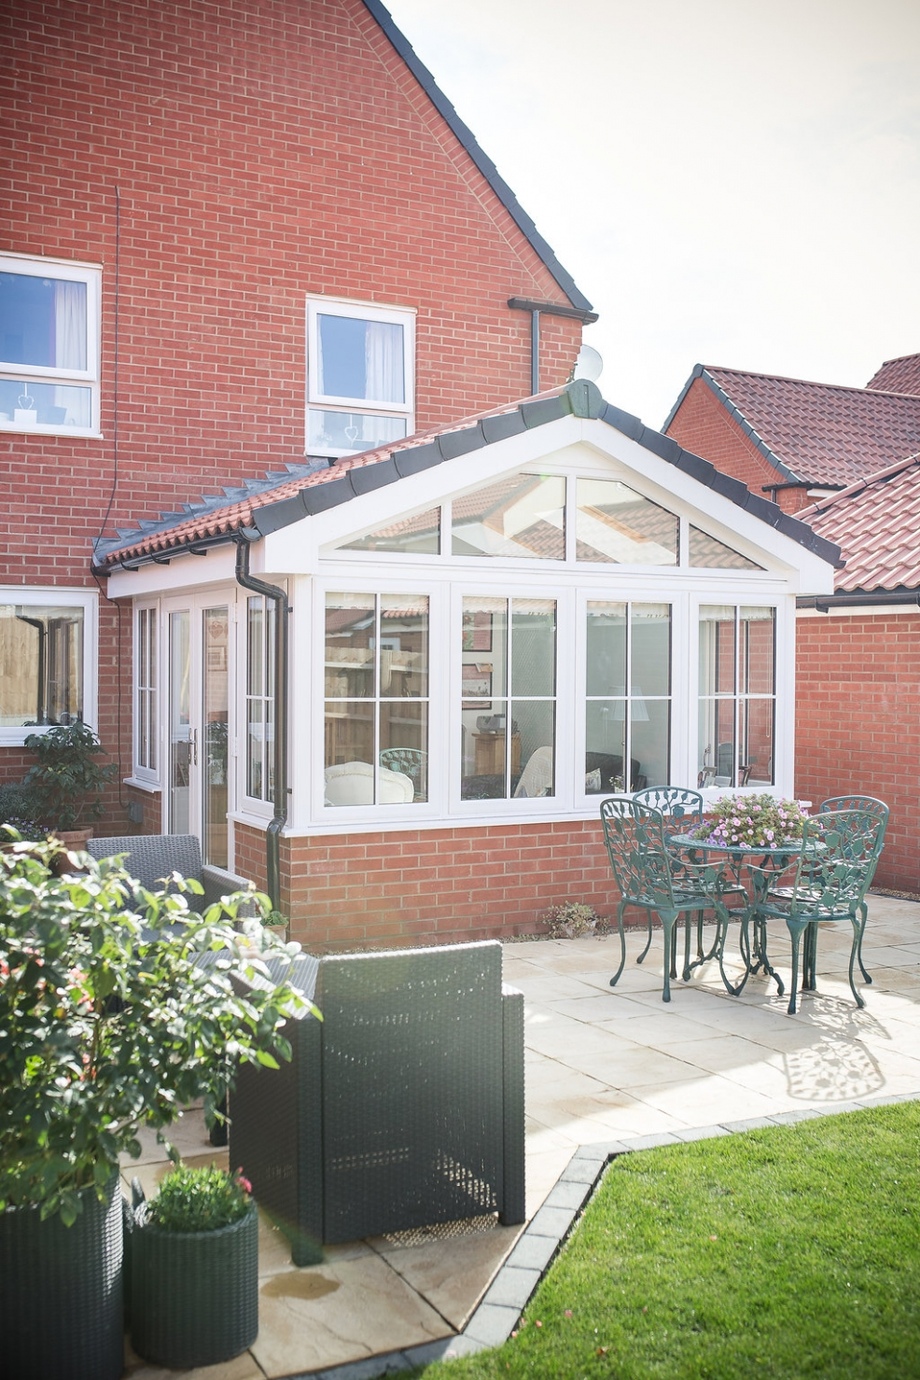 Externally, the new garden room blends seamlessly with the house